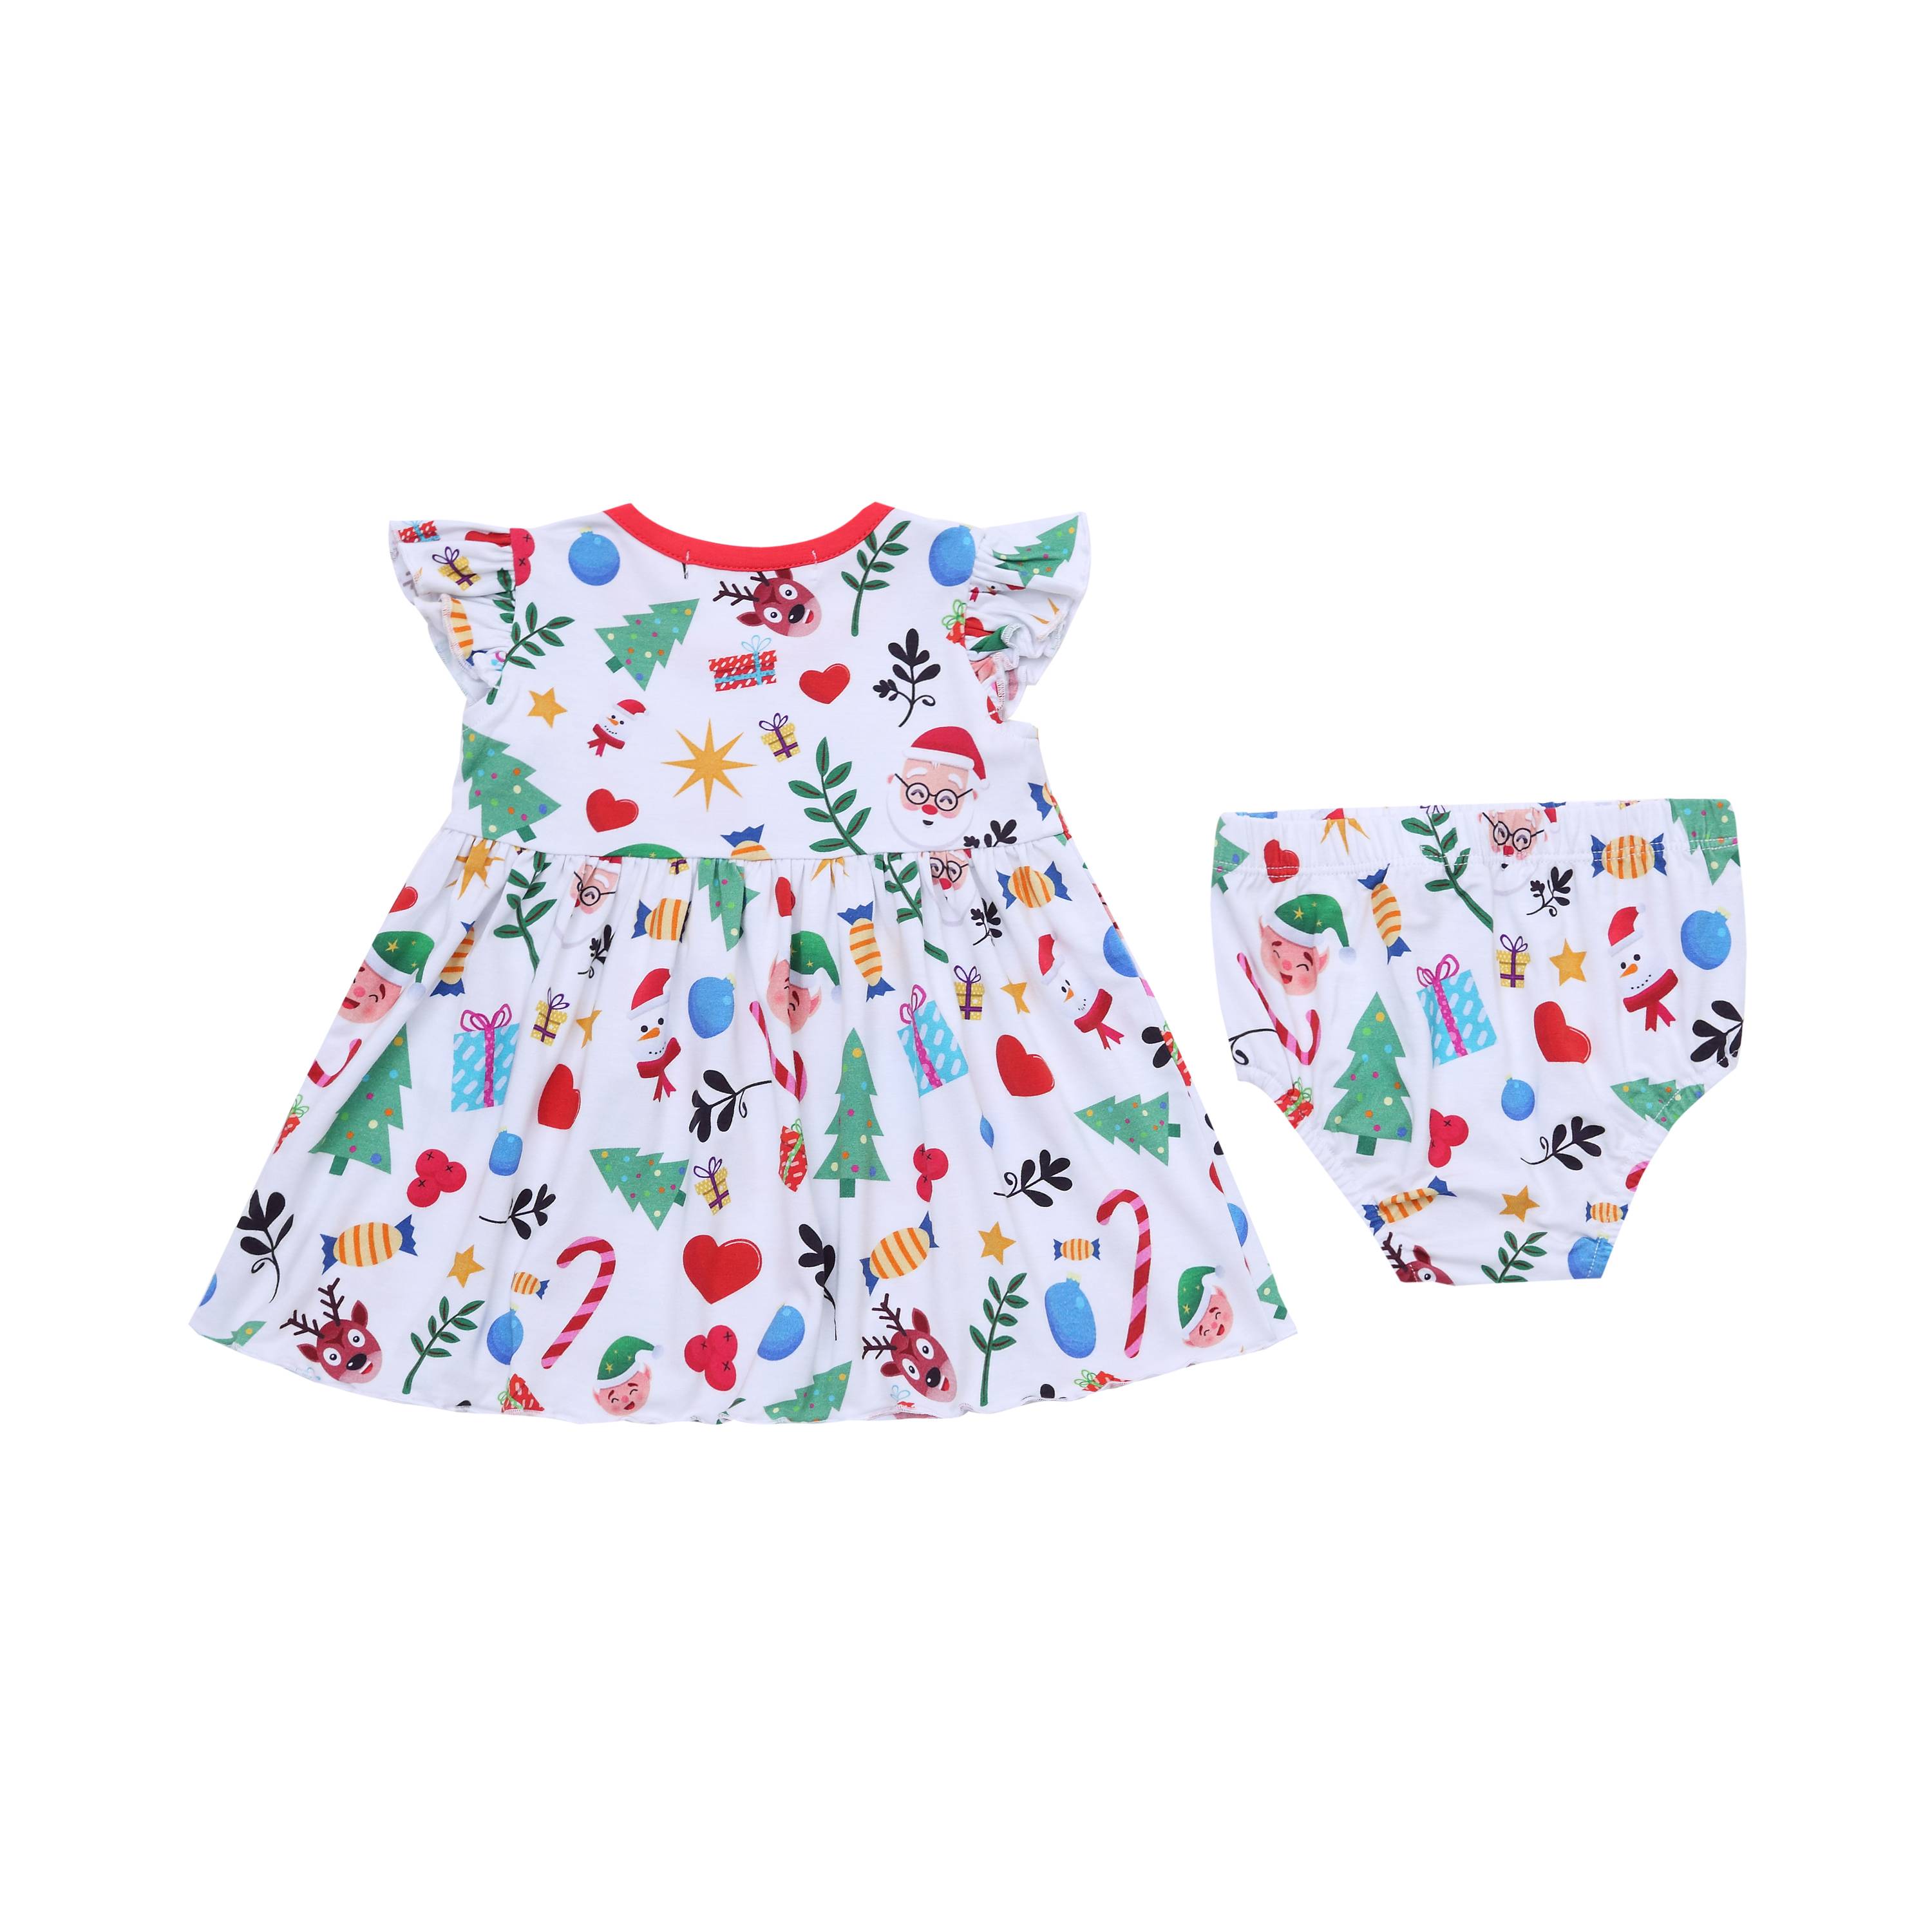 Wholesale baby bamboo fiber clothes romper bodysuit with digital printing Christmas holiday